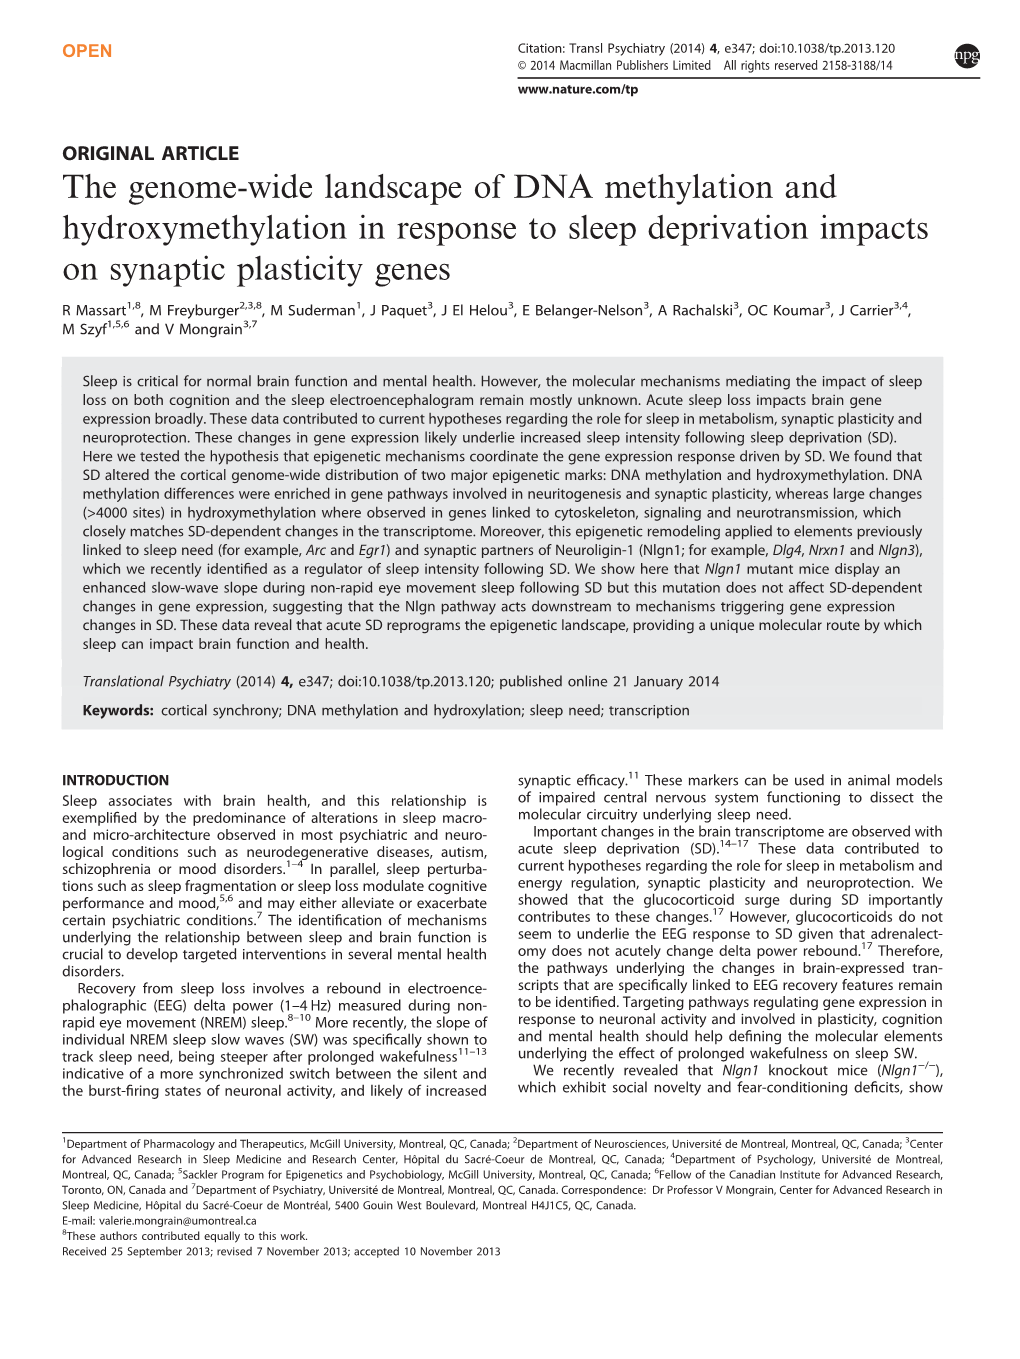 The Genome-Wide Landscape of DNA Methylation and Hydroxymethylation in Response to Sleep Deprivation Impacts on Synaptic Plasticity Genes